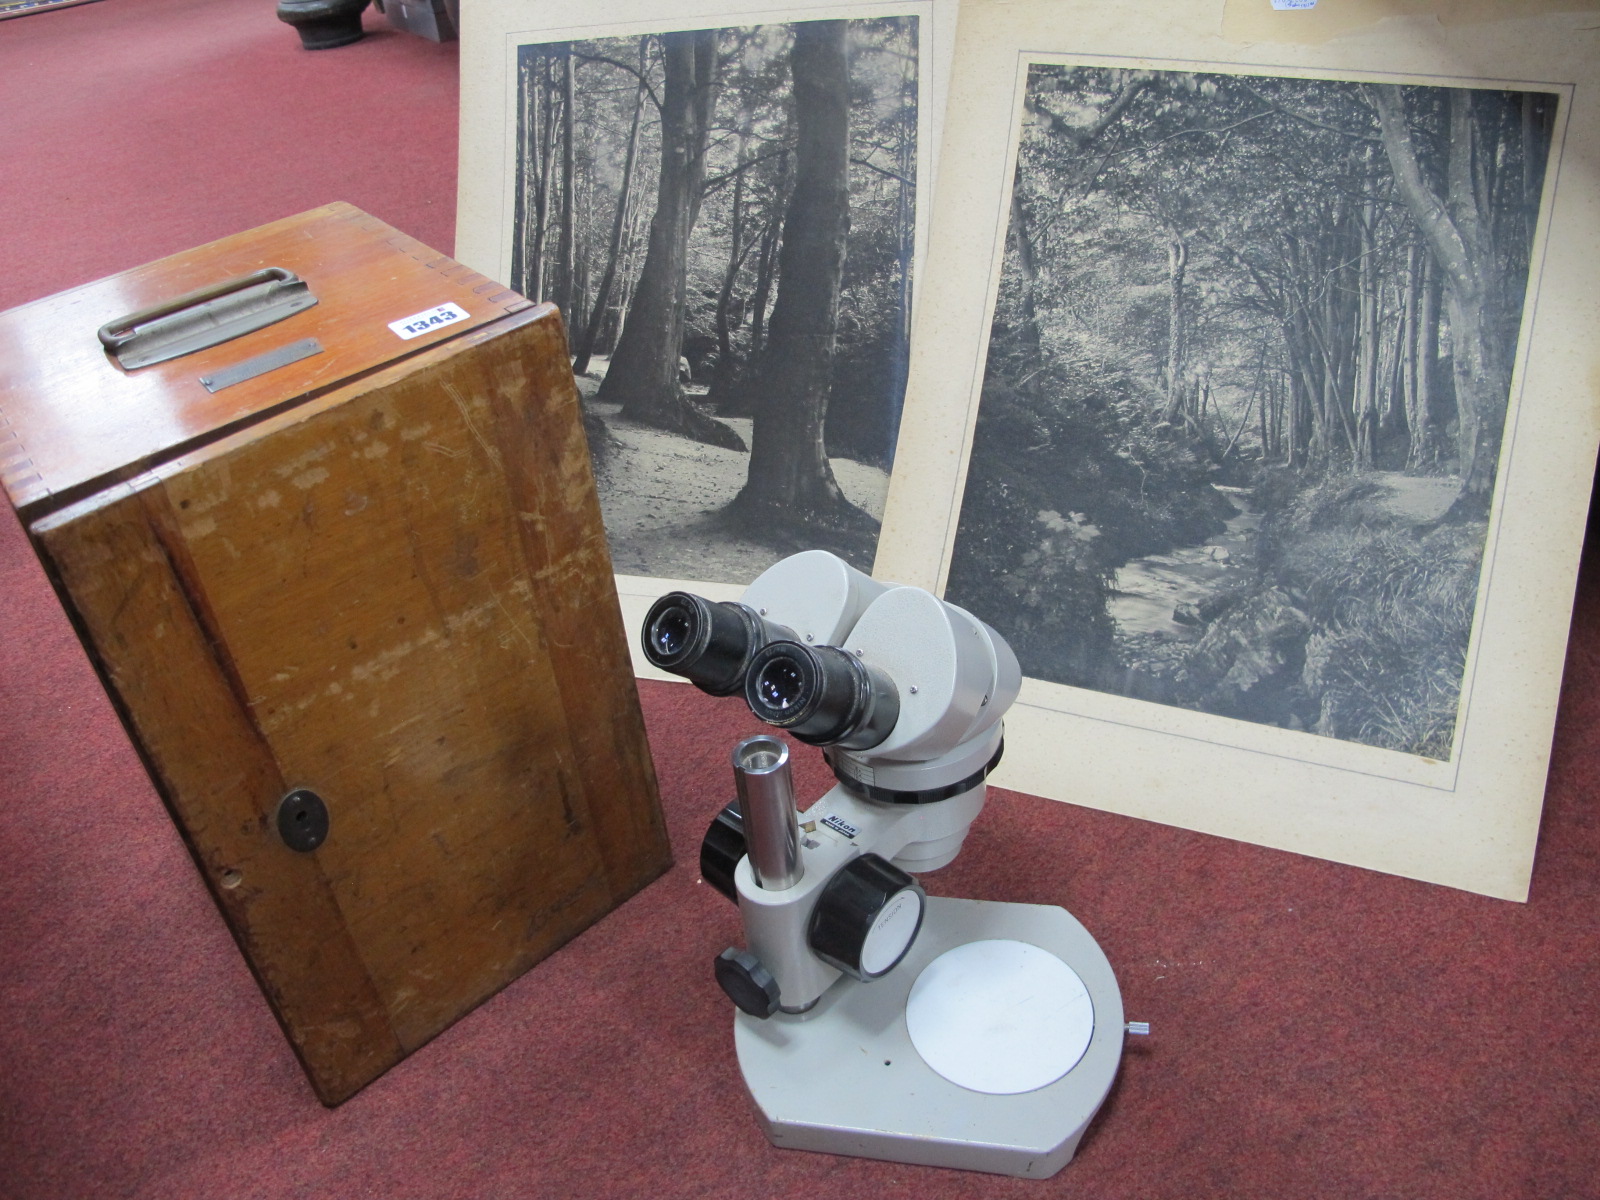 Nikon Microscope, having twin 10 x 23 lens, Walter C. Russell of Manchester, black and white